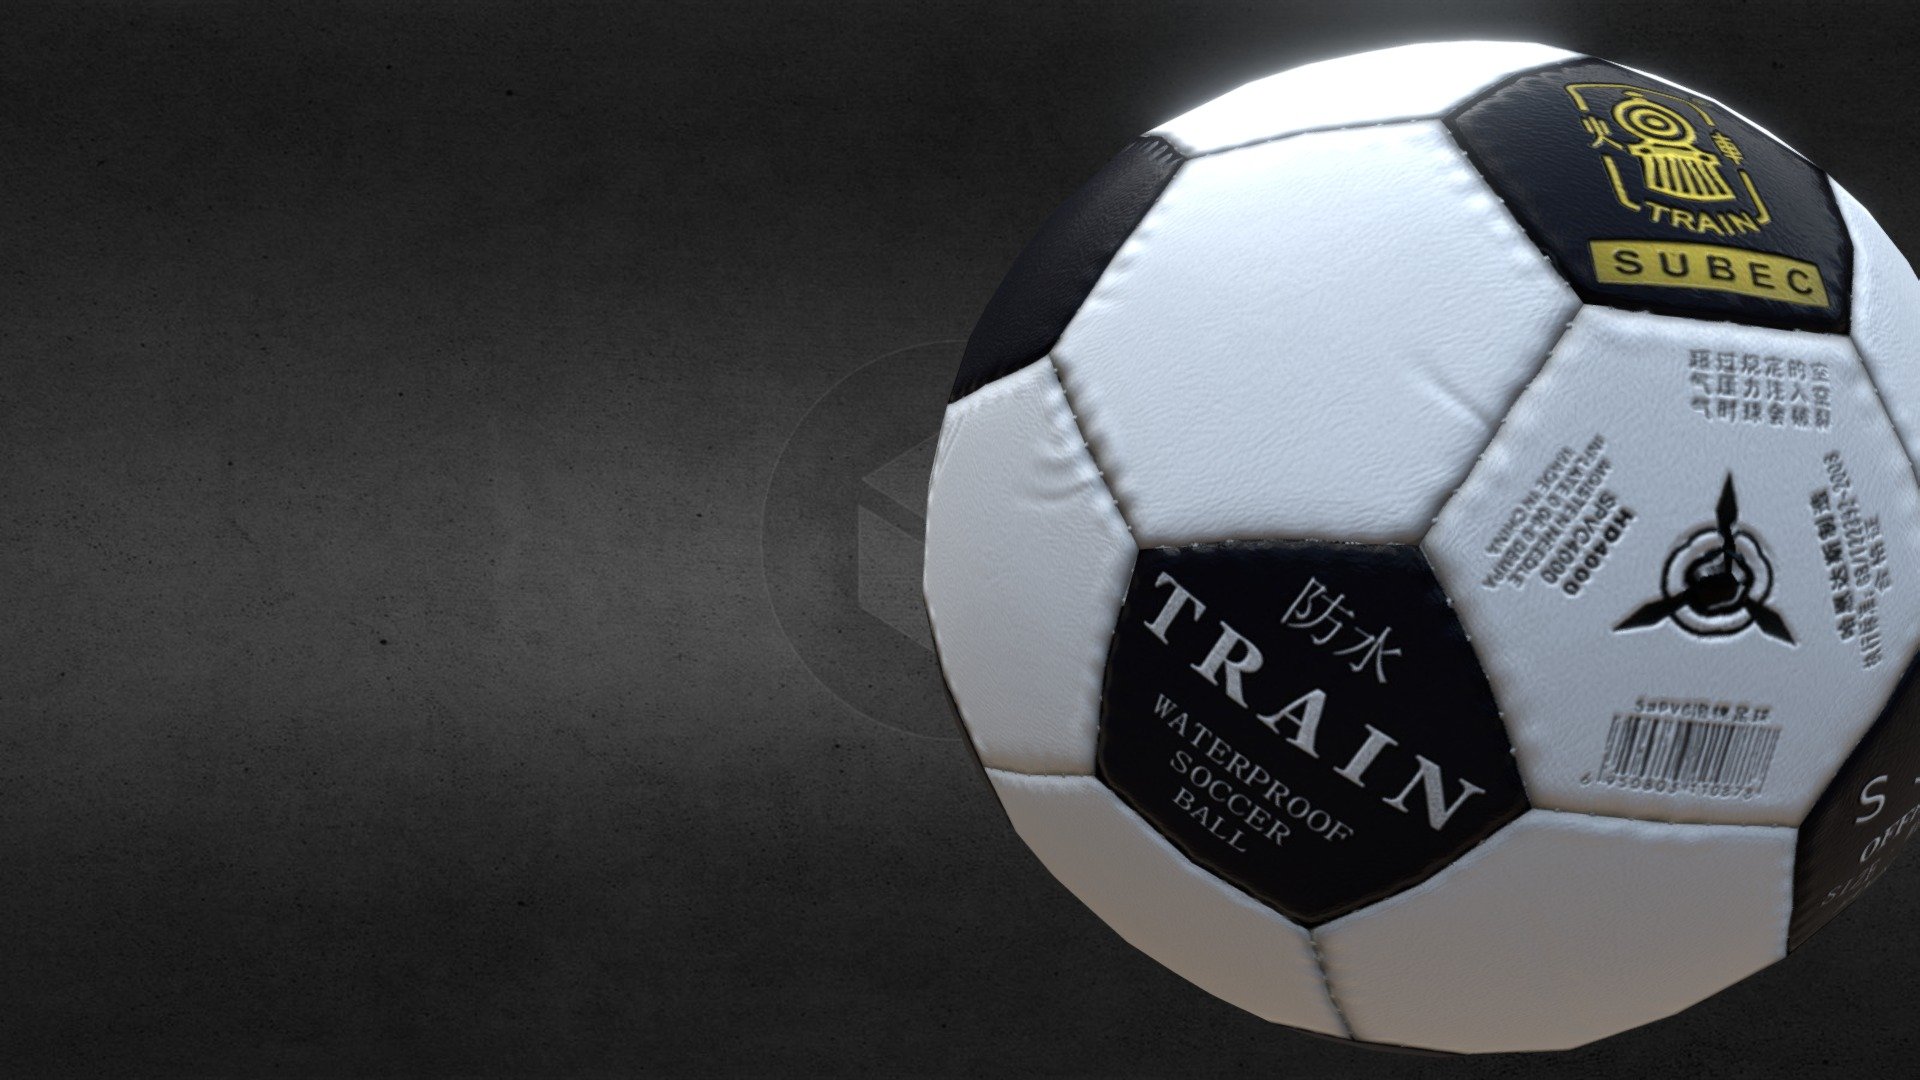 Game-ready classic soccer ball